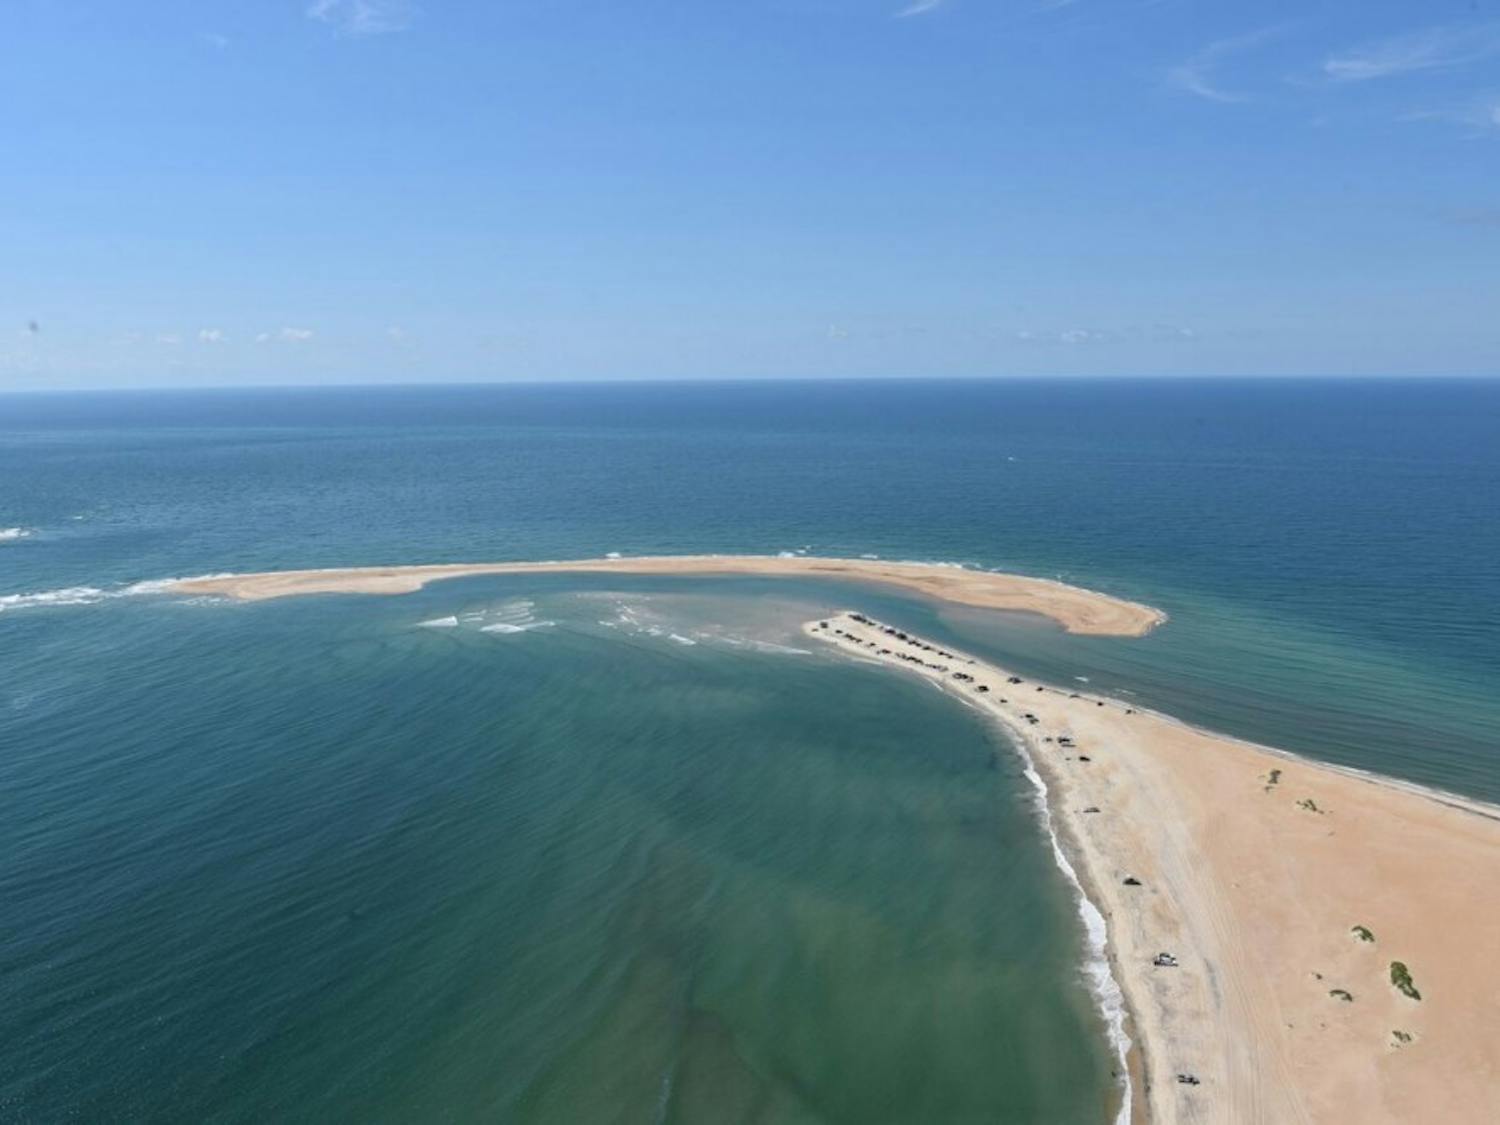 A new island started forming off the coast of Cape Point in the Outer Banks last fall. The sandbar, named Shelly Island, was found to be connected to Hatteras Island. Photo courtesy of outerbanks.org.